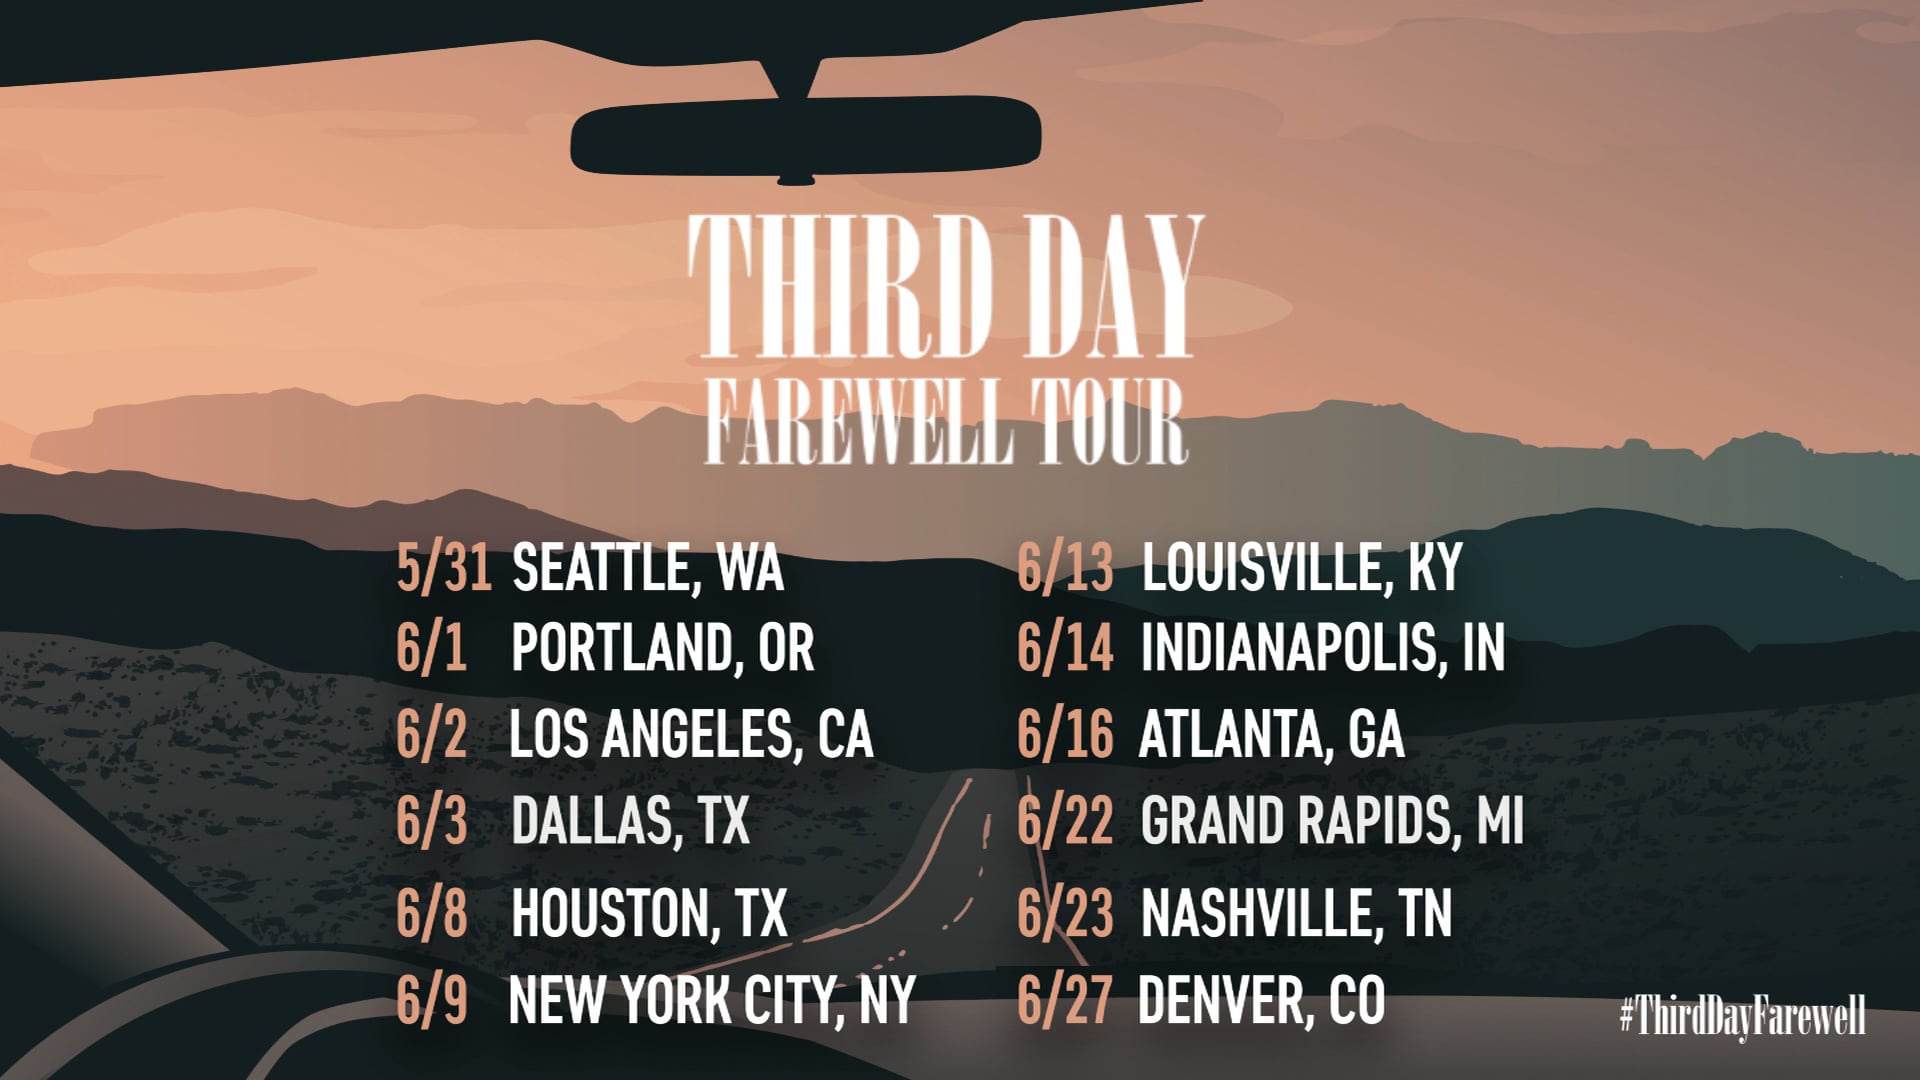 Third Day Tour Announcement Video on Vimeo